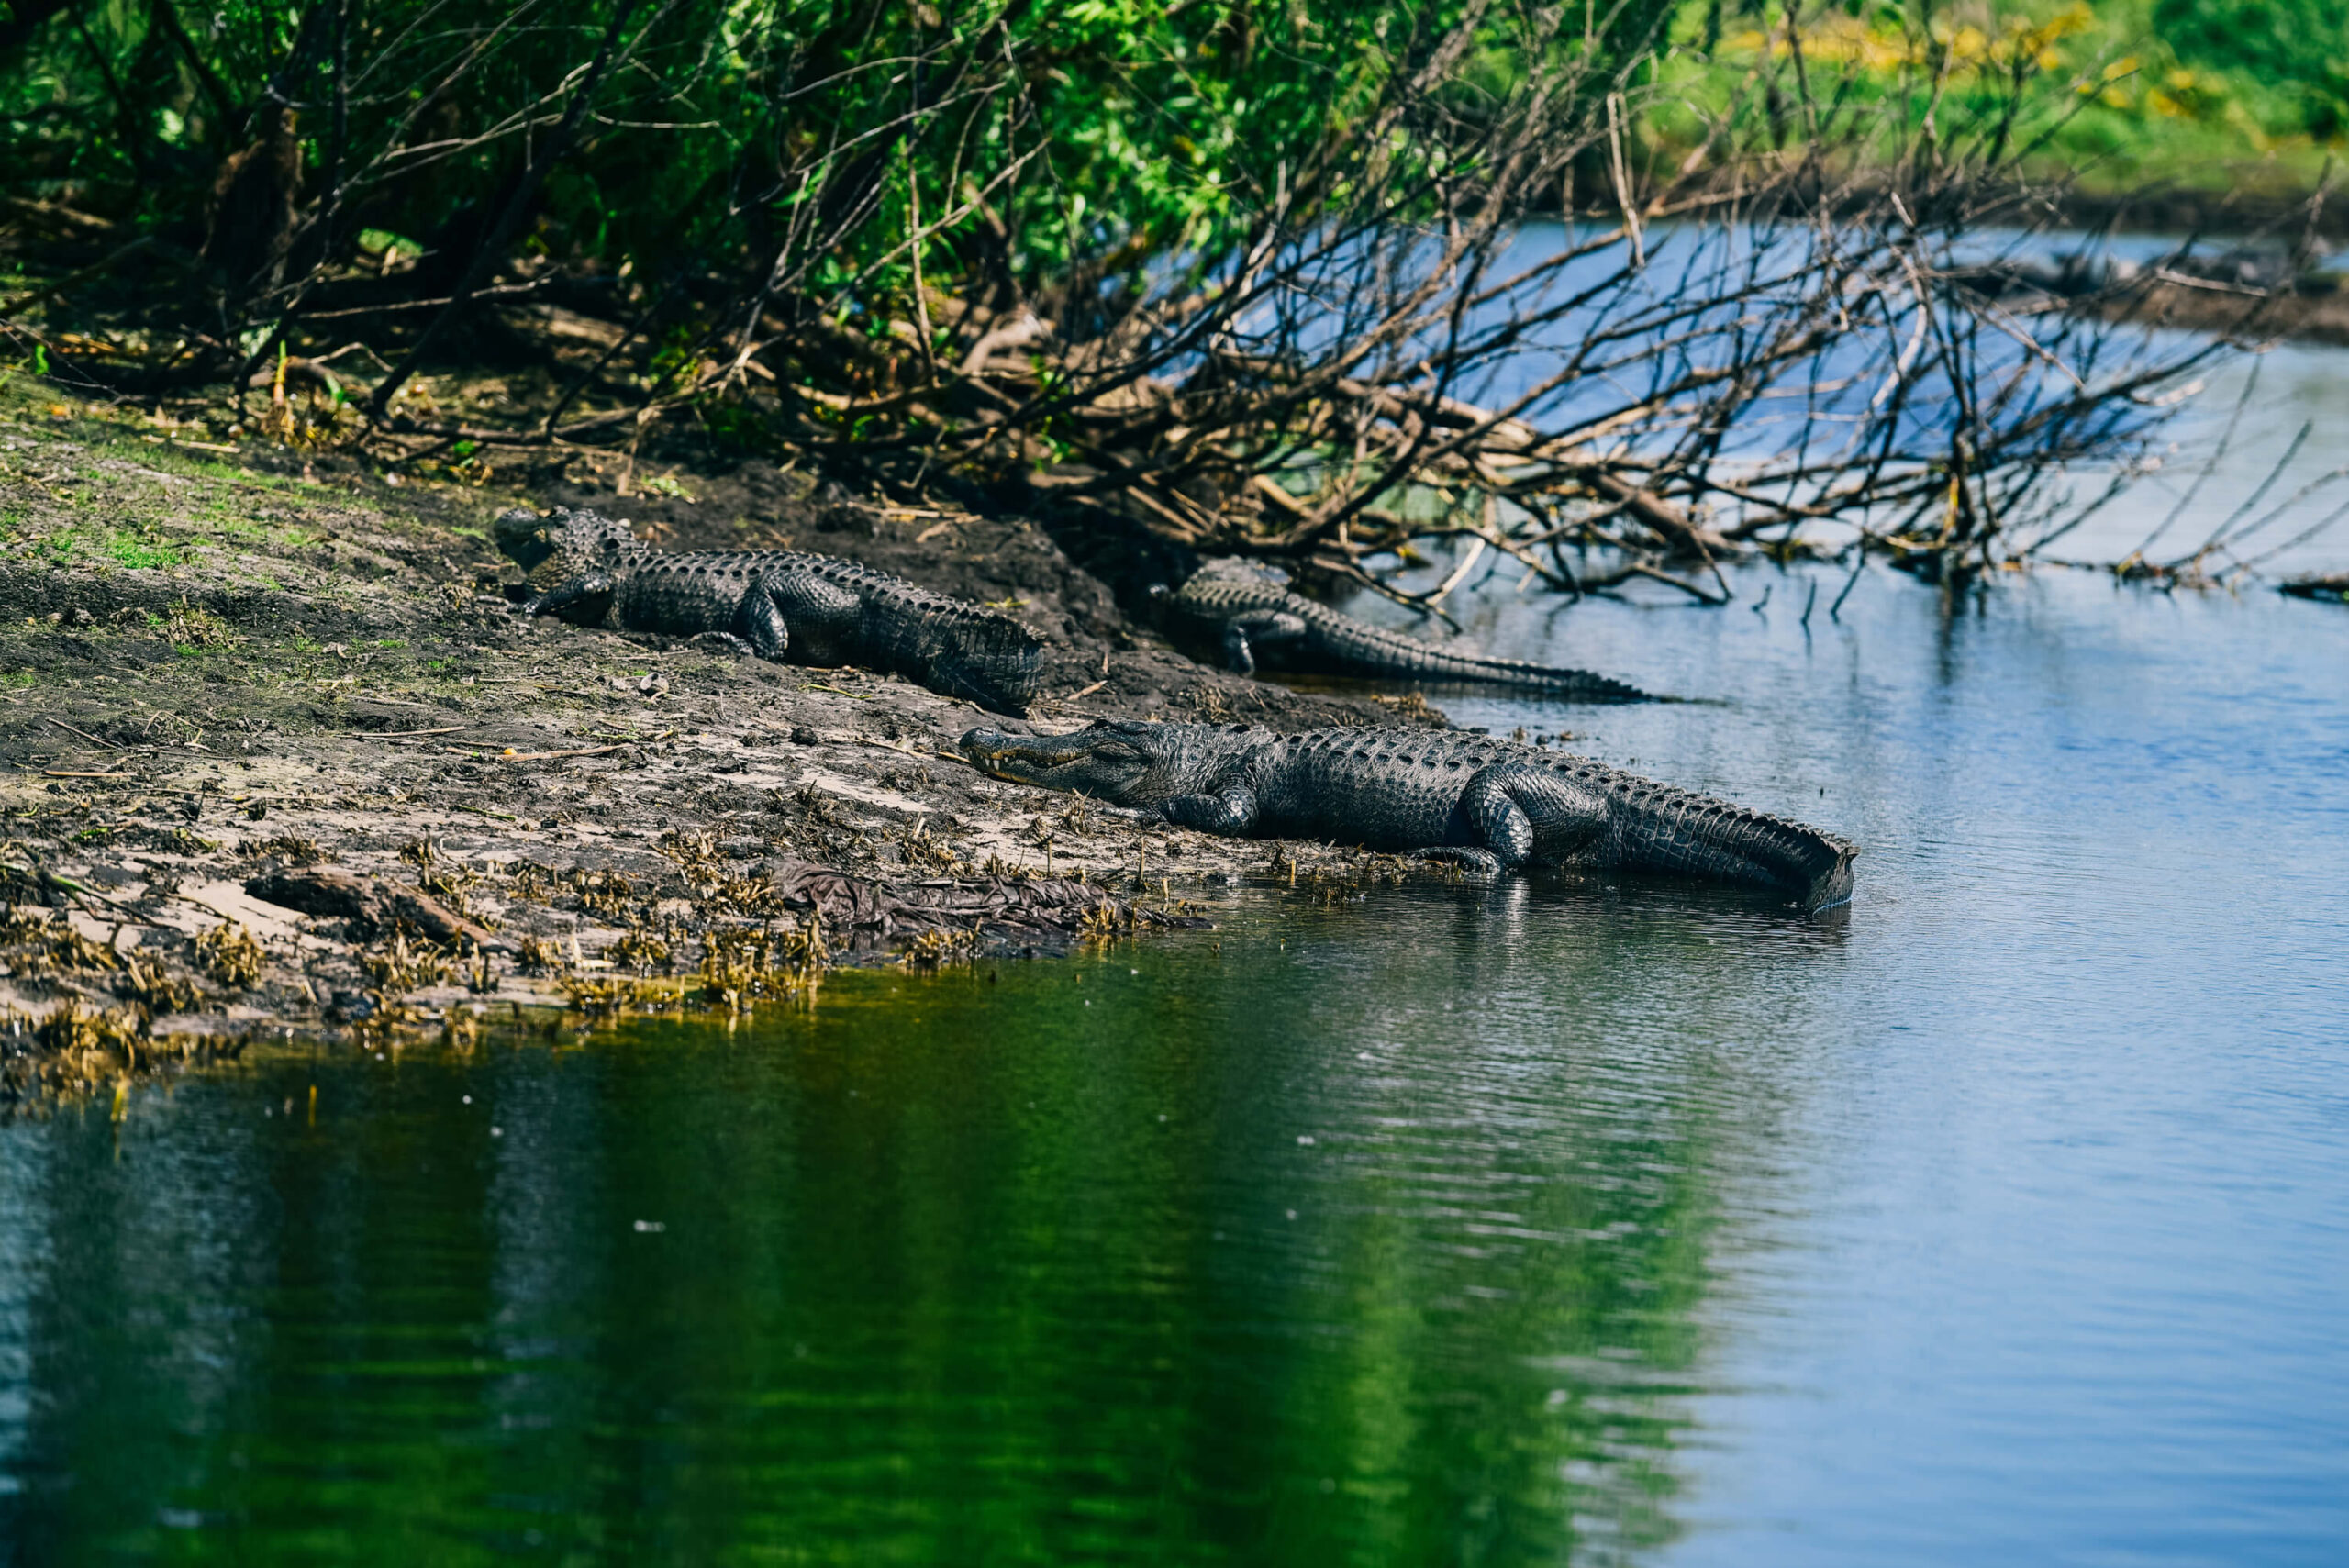 Alligator viewing from an airboat tour